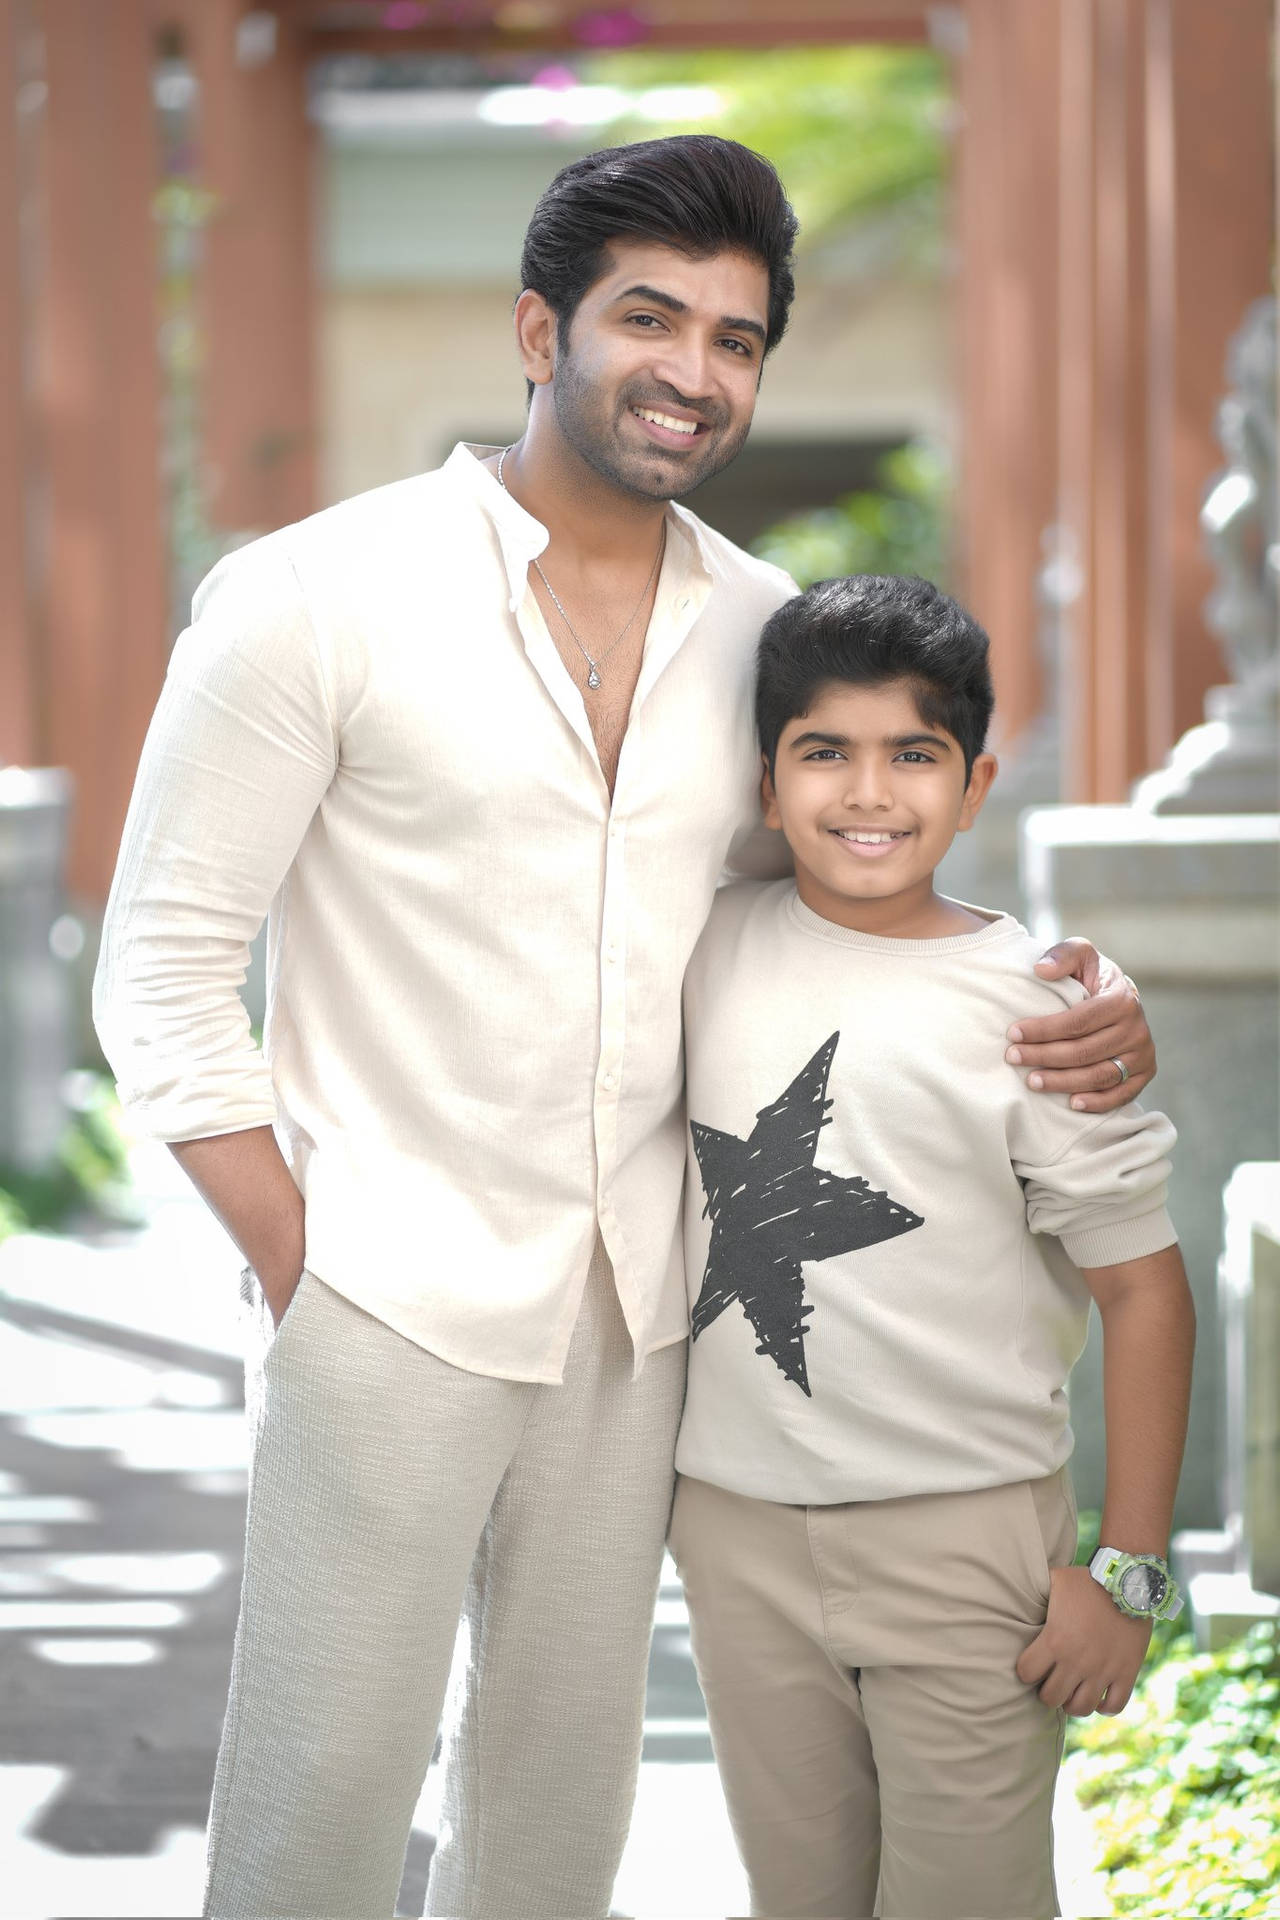 Arun Vijay With A Young Boy Background